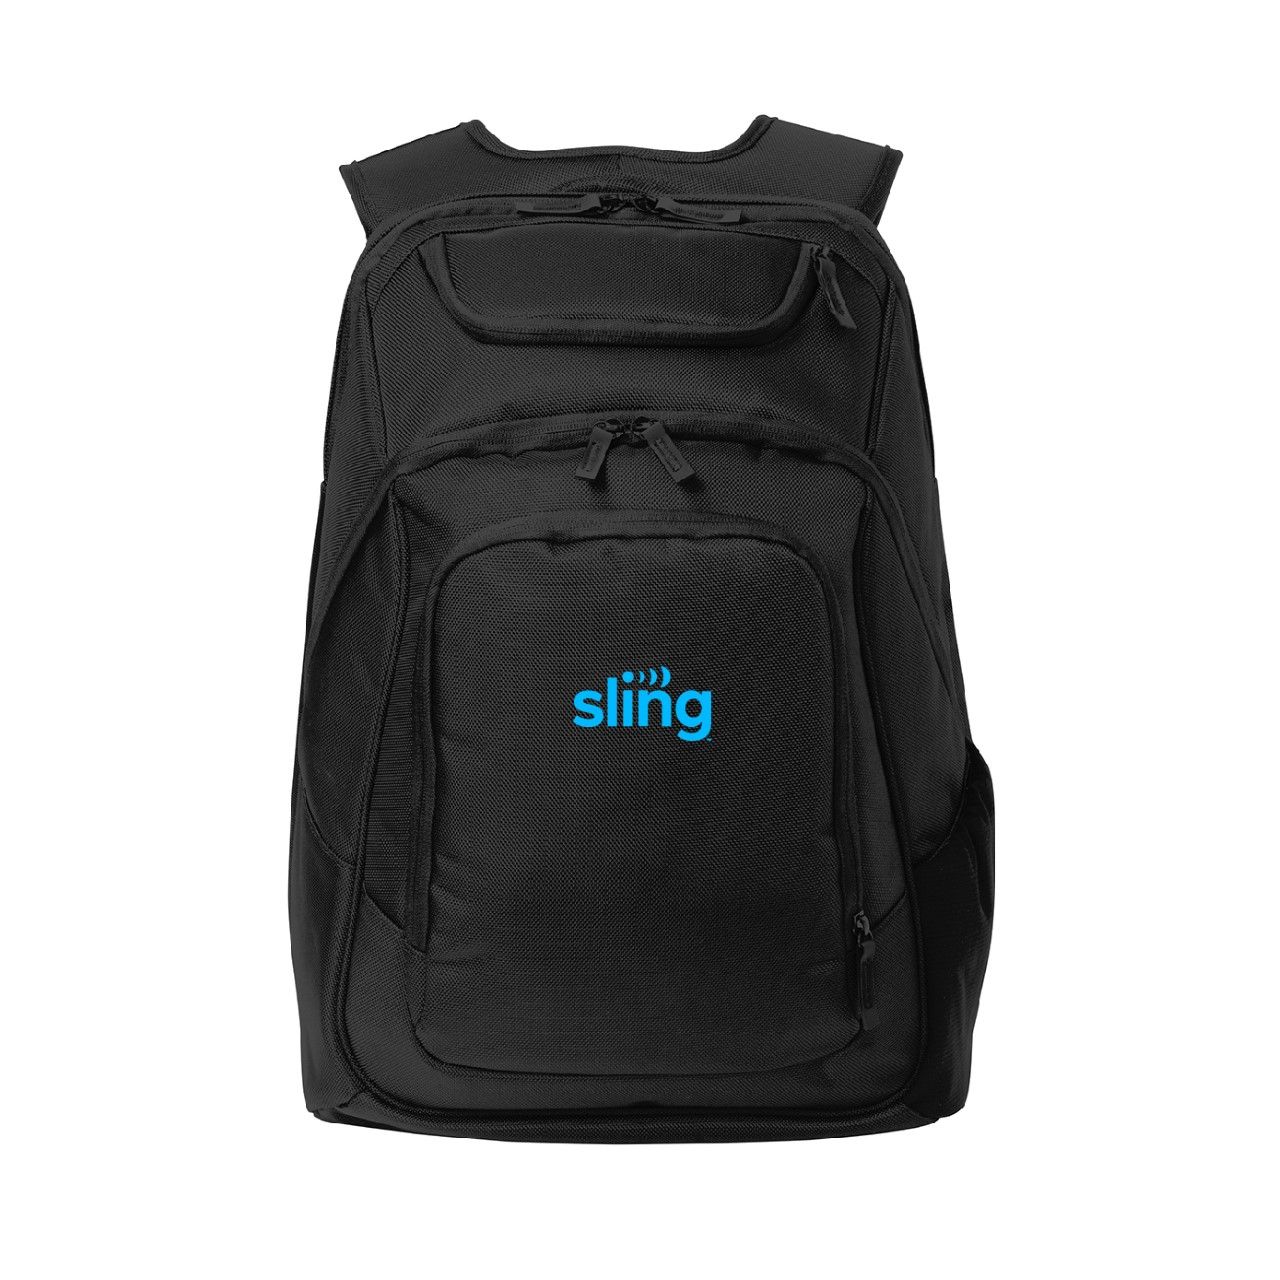 Exec Backpack with Sling Logo